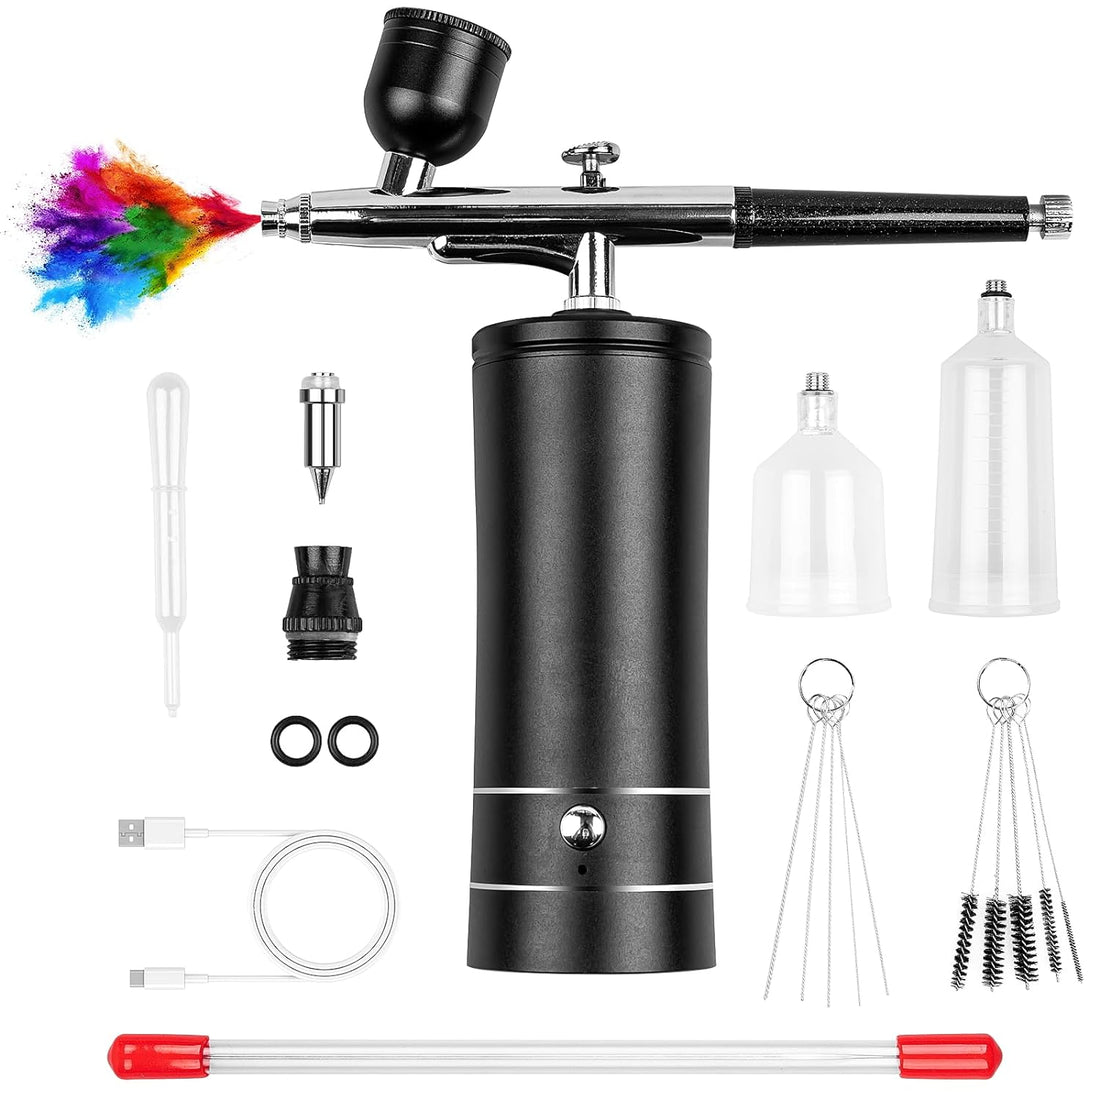 Esakoya Airbrush Kit Rechargeable Cordless Airbrush Compressor, 30PSI High Pressure, Portable Handheld Airbrush Gun with 0.3mm Nozzle and Cleaning Brush Set for Makeup, Barber, Nail Art, Cake Decor